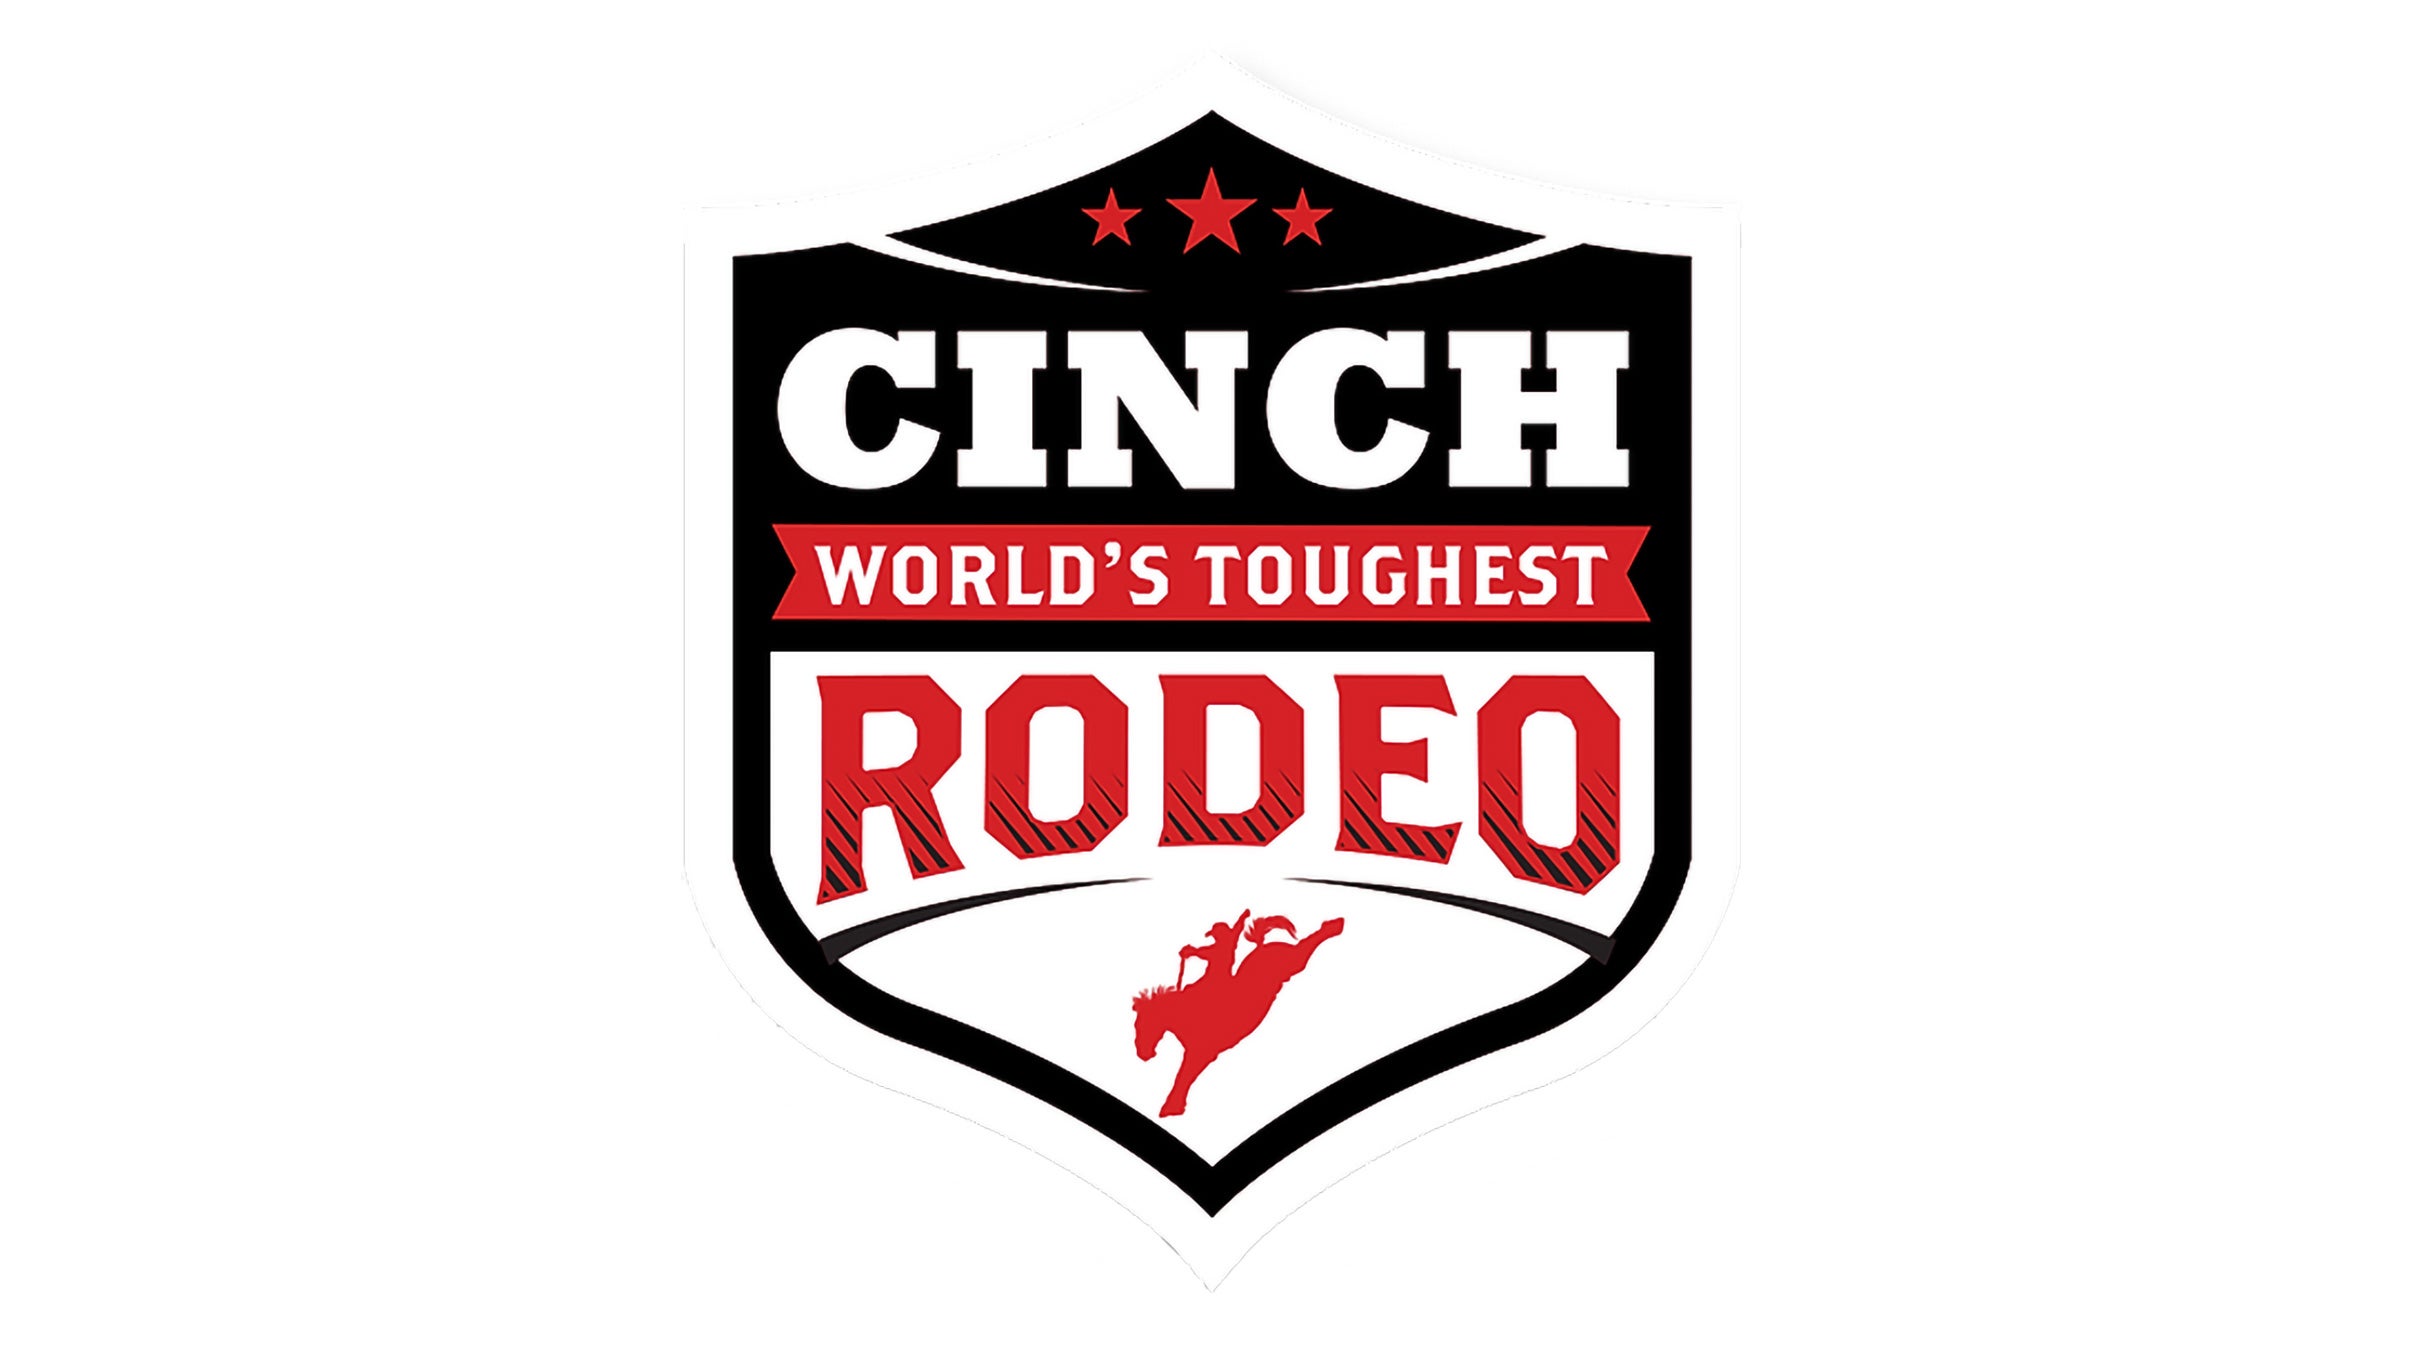 accurate presale password to Cinch World's Toughest Rodeo affordable tickets in Columbia